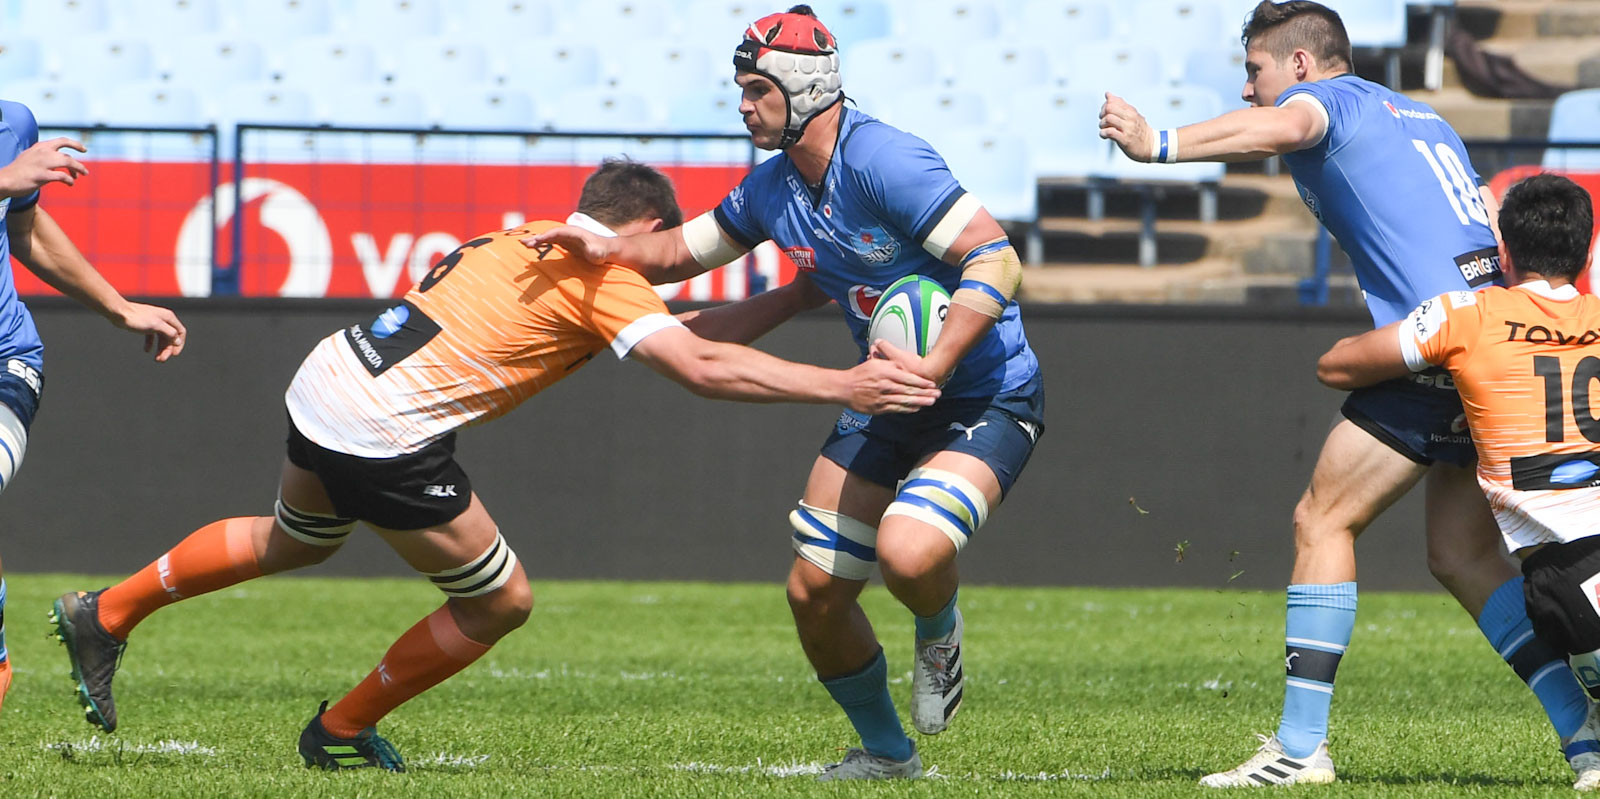 Rynard Mouton scored one of eight tries for the Vodacom Bulls against Toyota Free State.